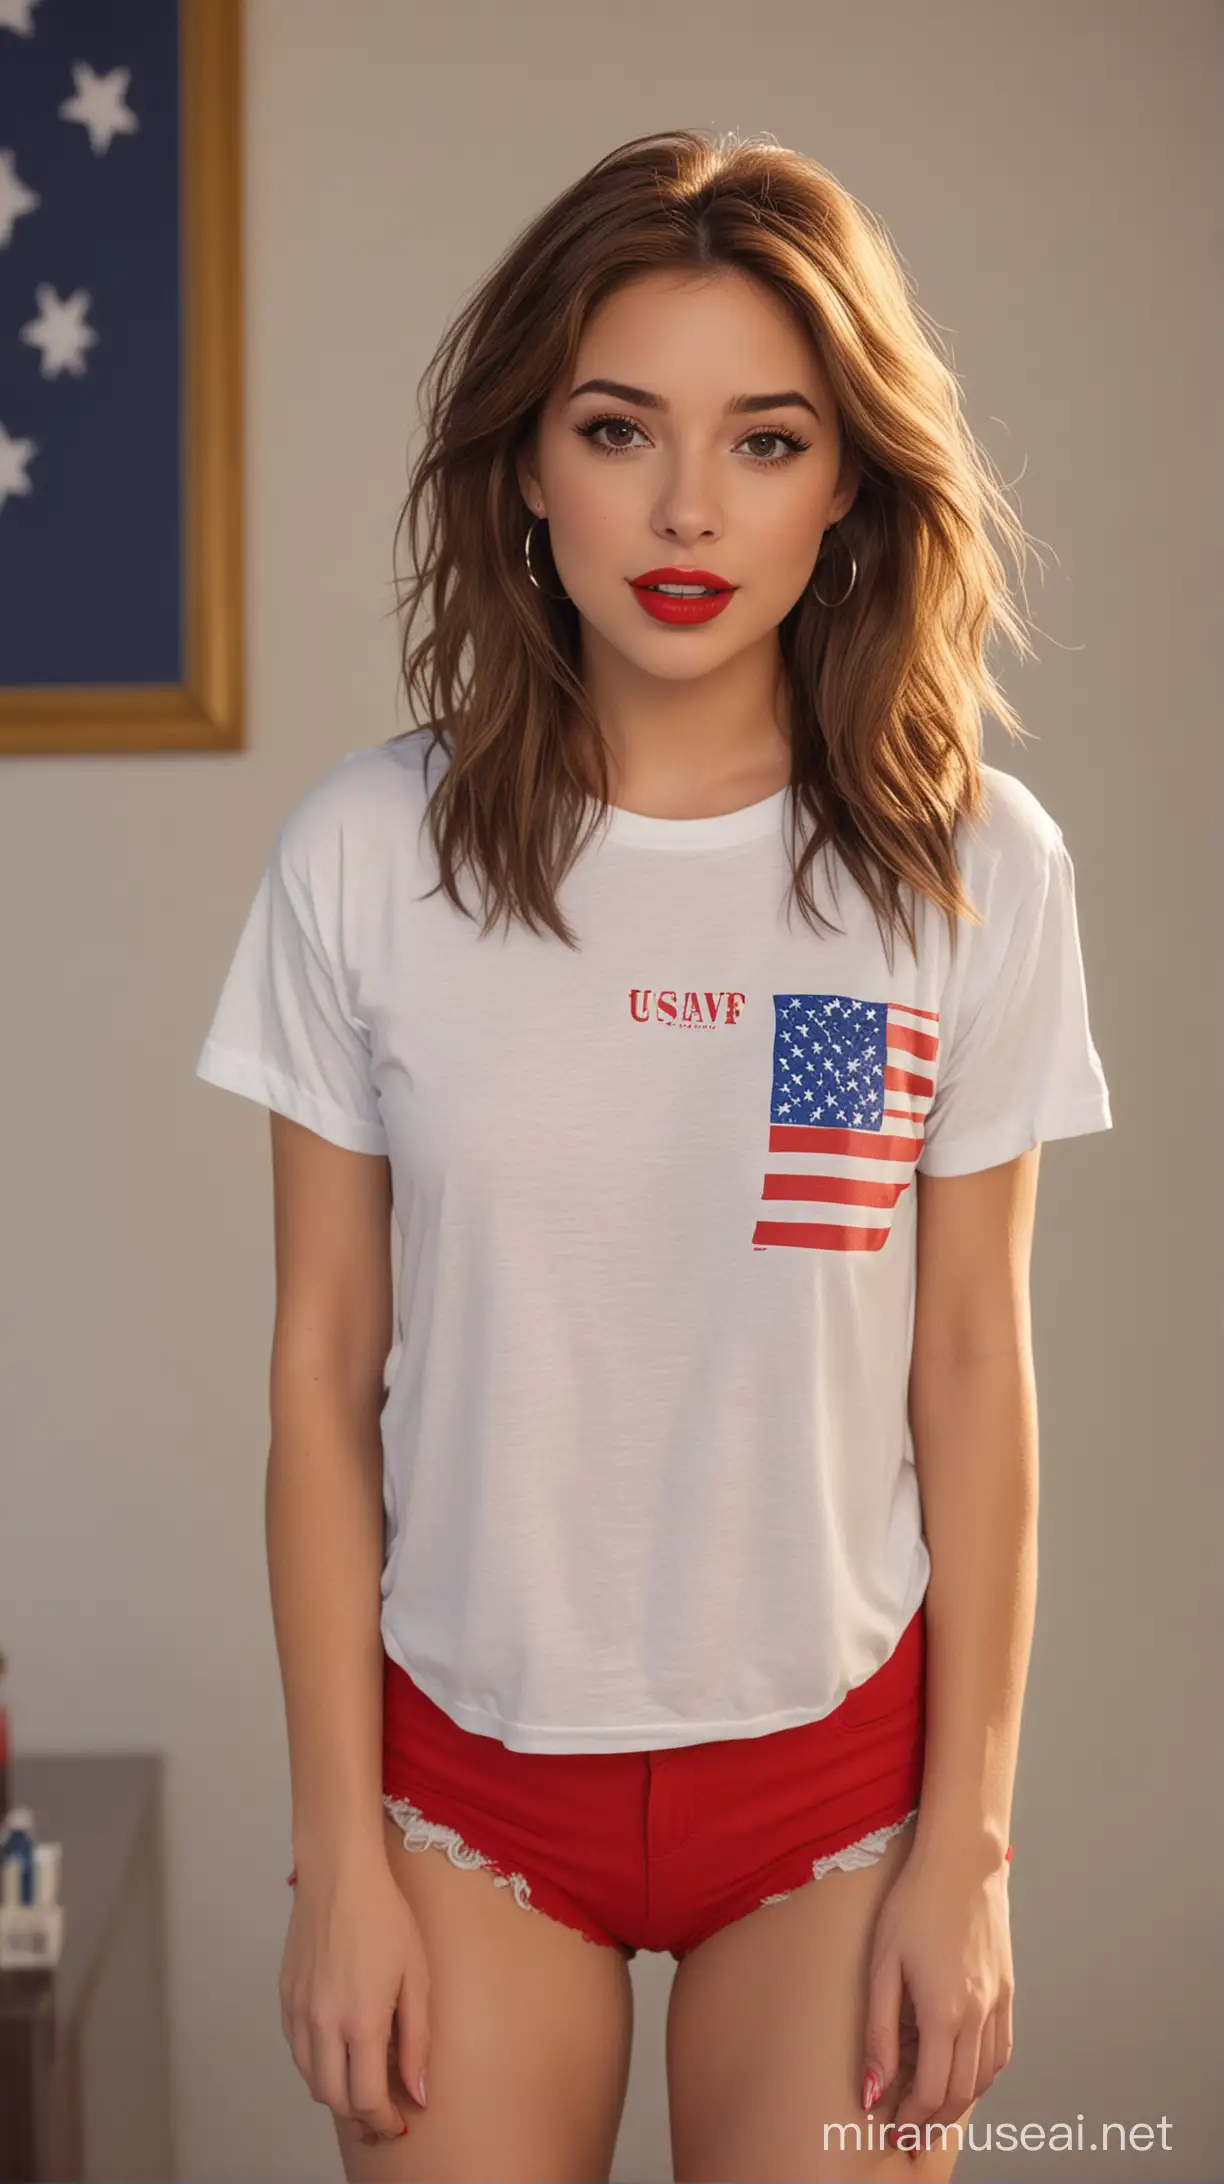 Stylish American Girl with Brown Hair and Red Lipstick in Casual Summer Outfit